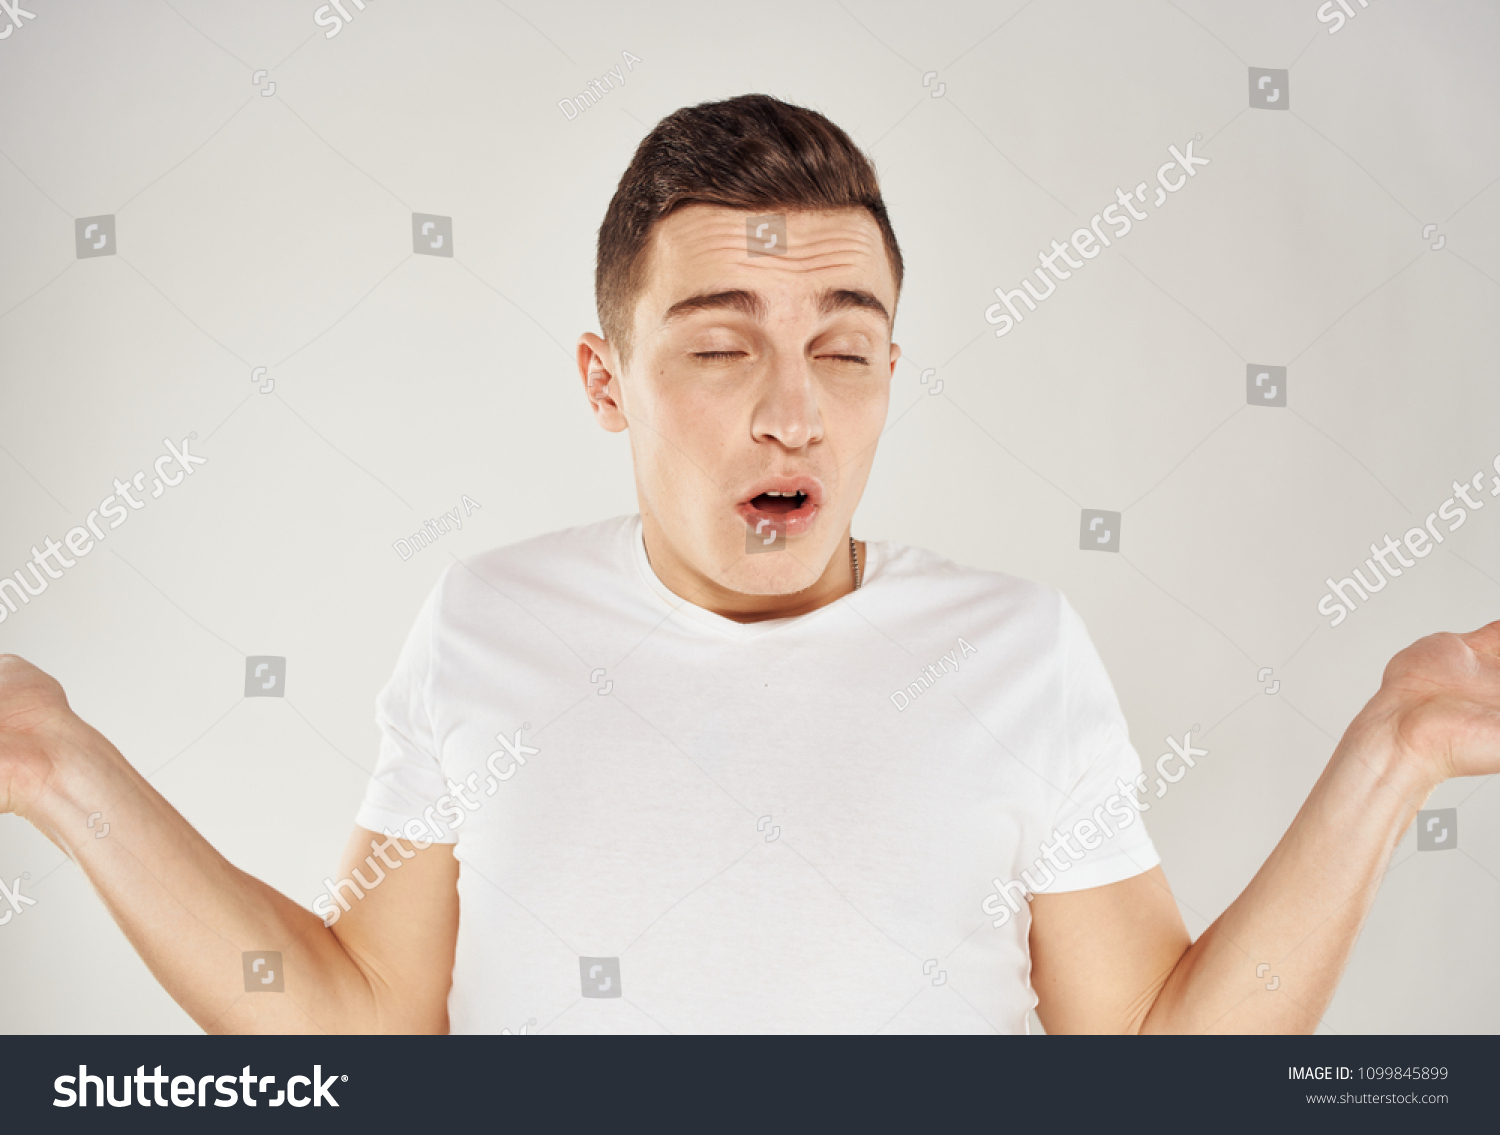 Man His Eyes Closed Spread His Stock Photo 1099845899 | Shutterstock